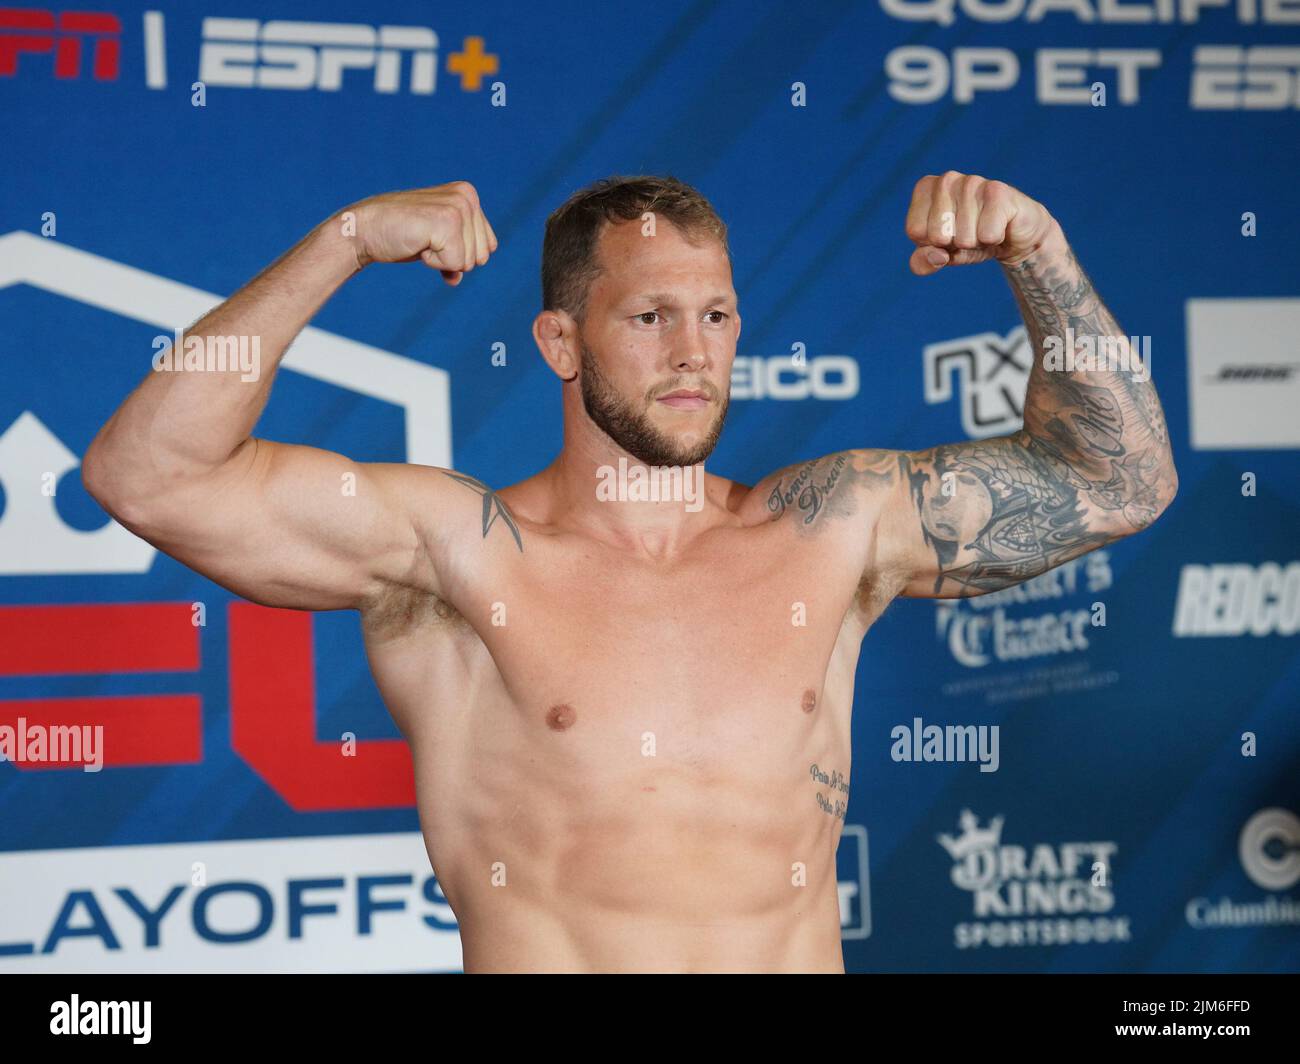 NEW YORK CITY, NY - August 3: Marthin Hamlet steps on the scale for the official weigh-ins at The New Yorker Hotel for 2022 PFL Playoffs Semi-Finals : Official Weigh-ins on August 3, 2022 in New York City, NY, United States. (Photo by Louis Grasse/PxImages) Stock Photo